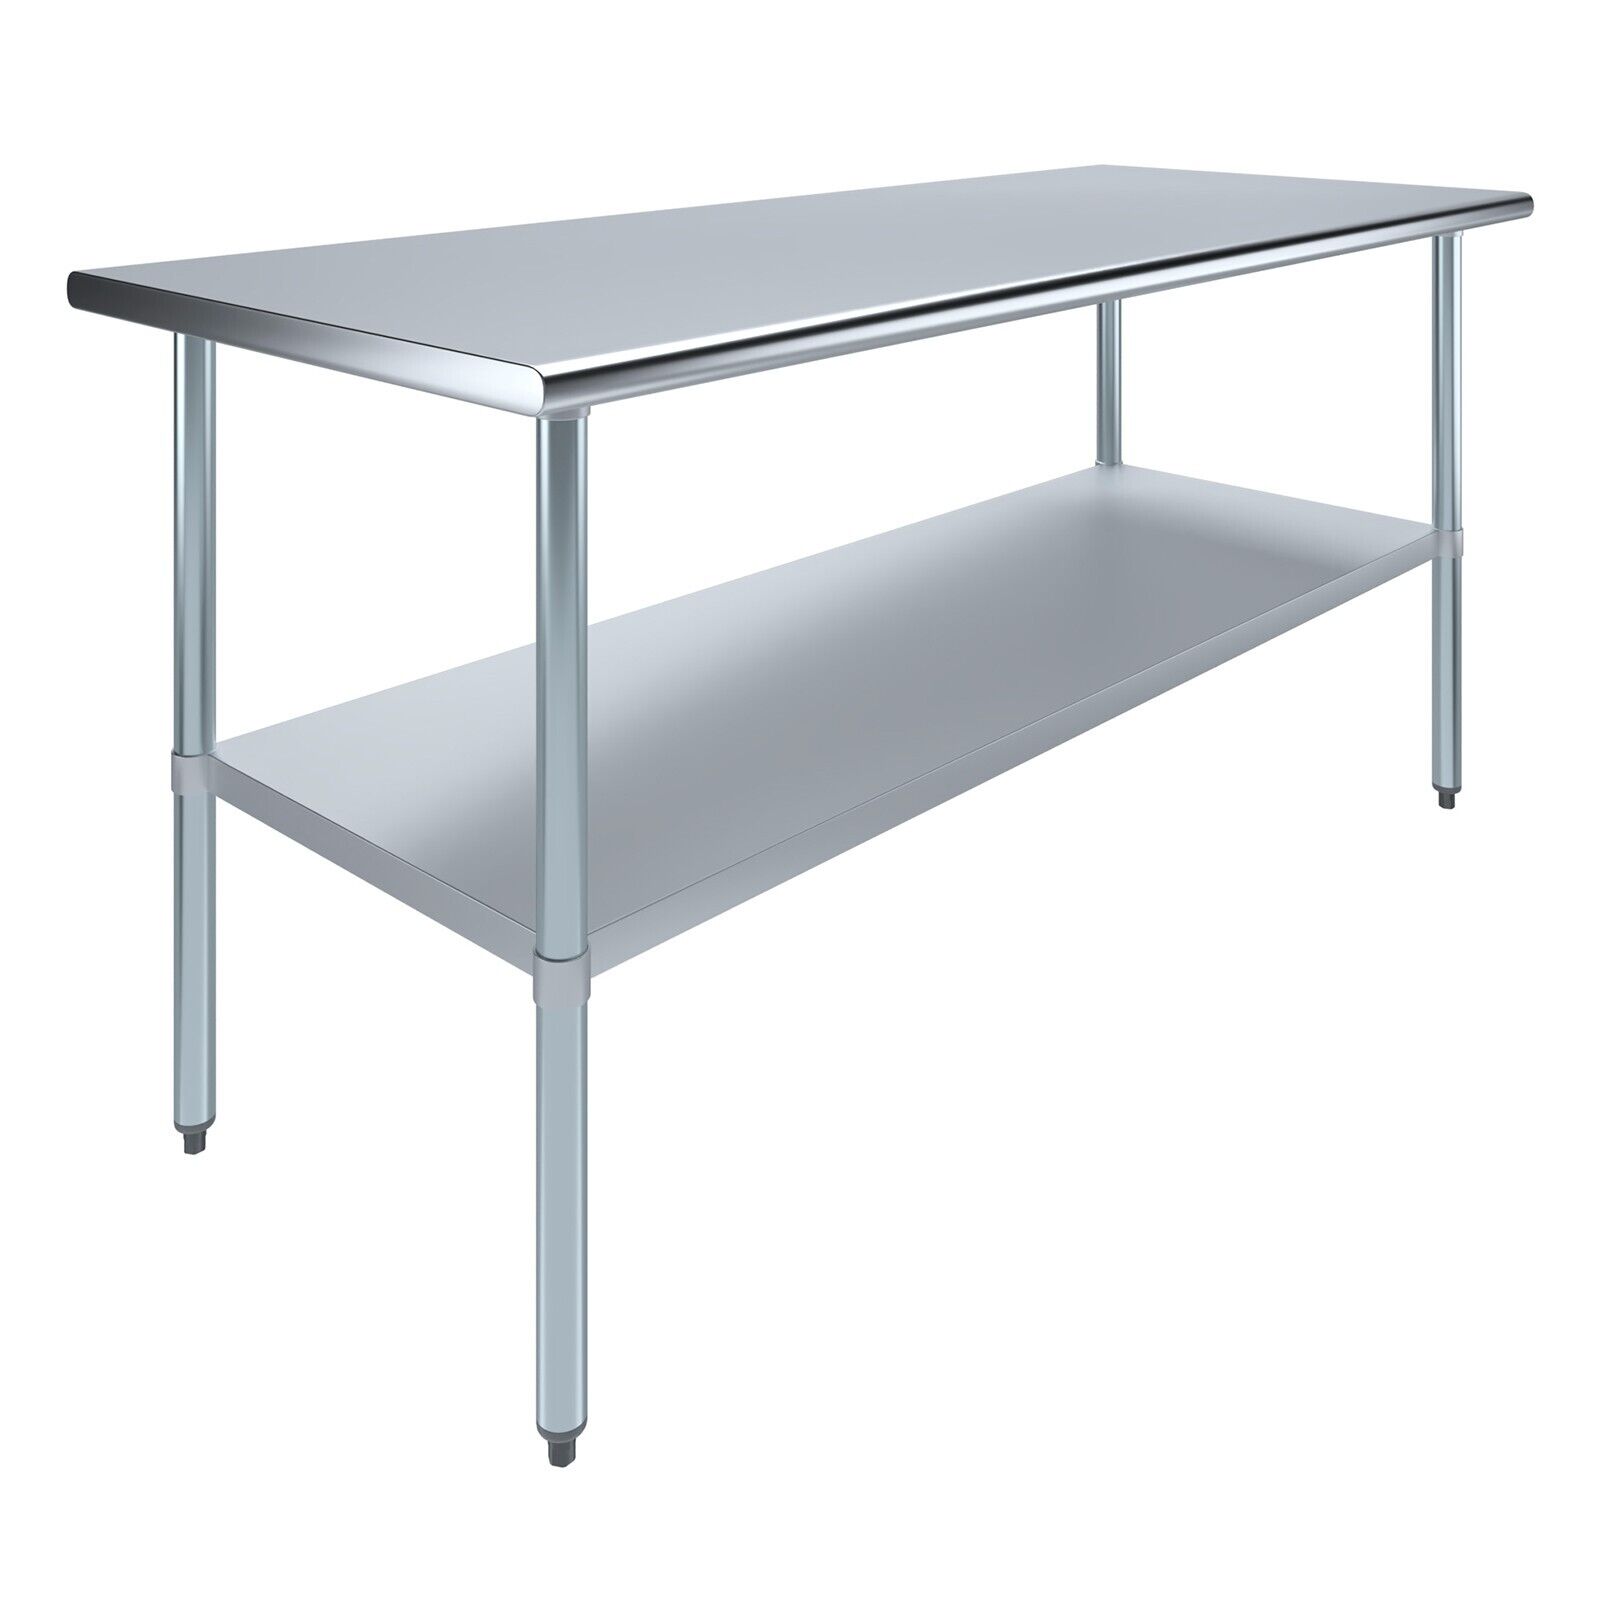 30 in. x 72 in. Stainless Steel Table